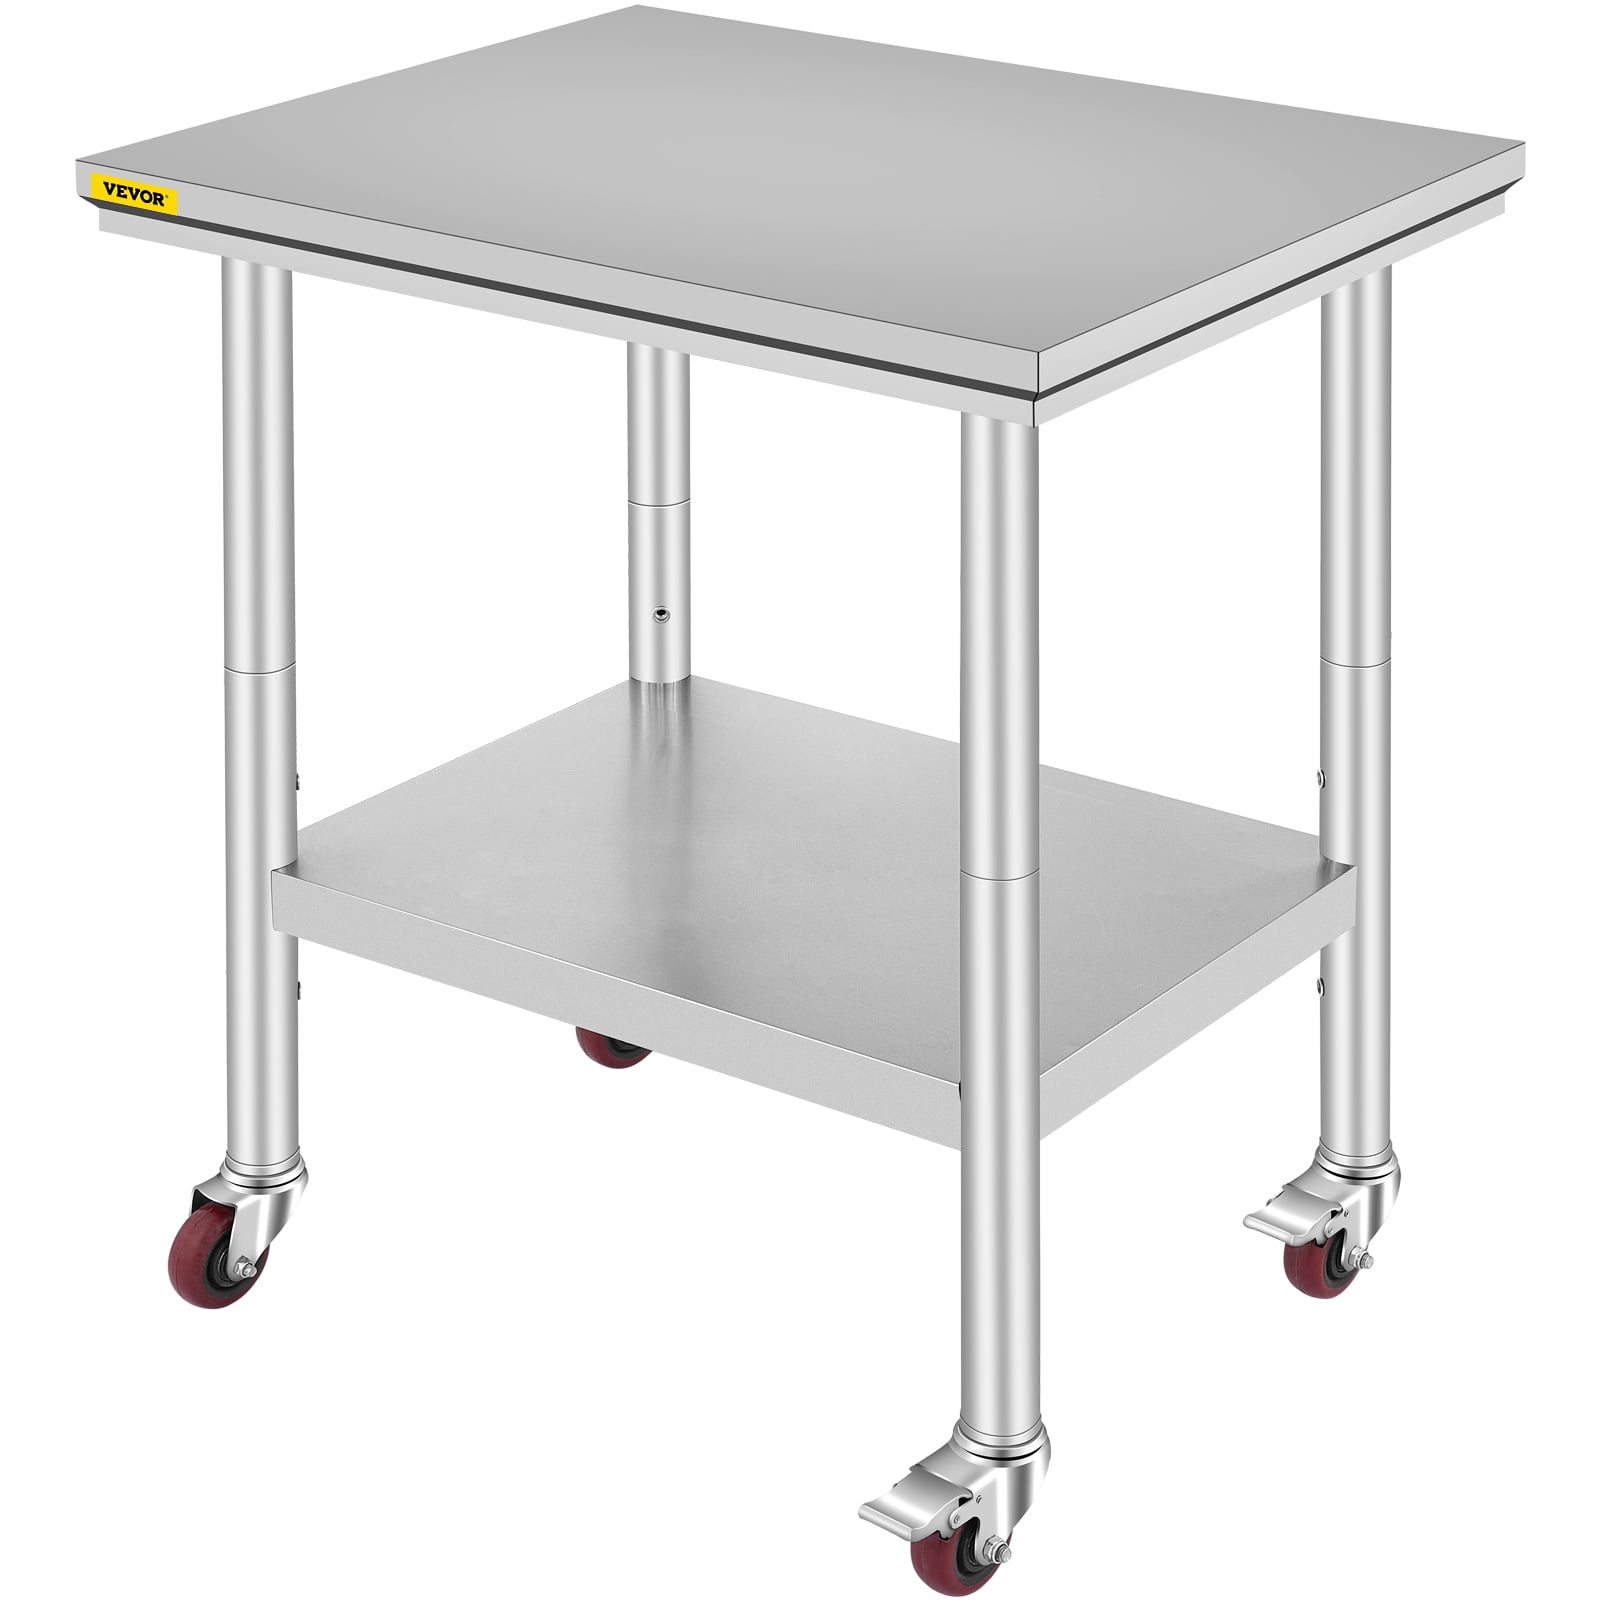 Commercial Stainless Steel Food Prep Work Table 14 x 24 with Casters Wheels 